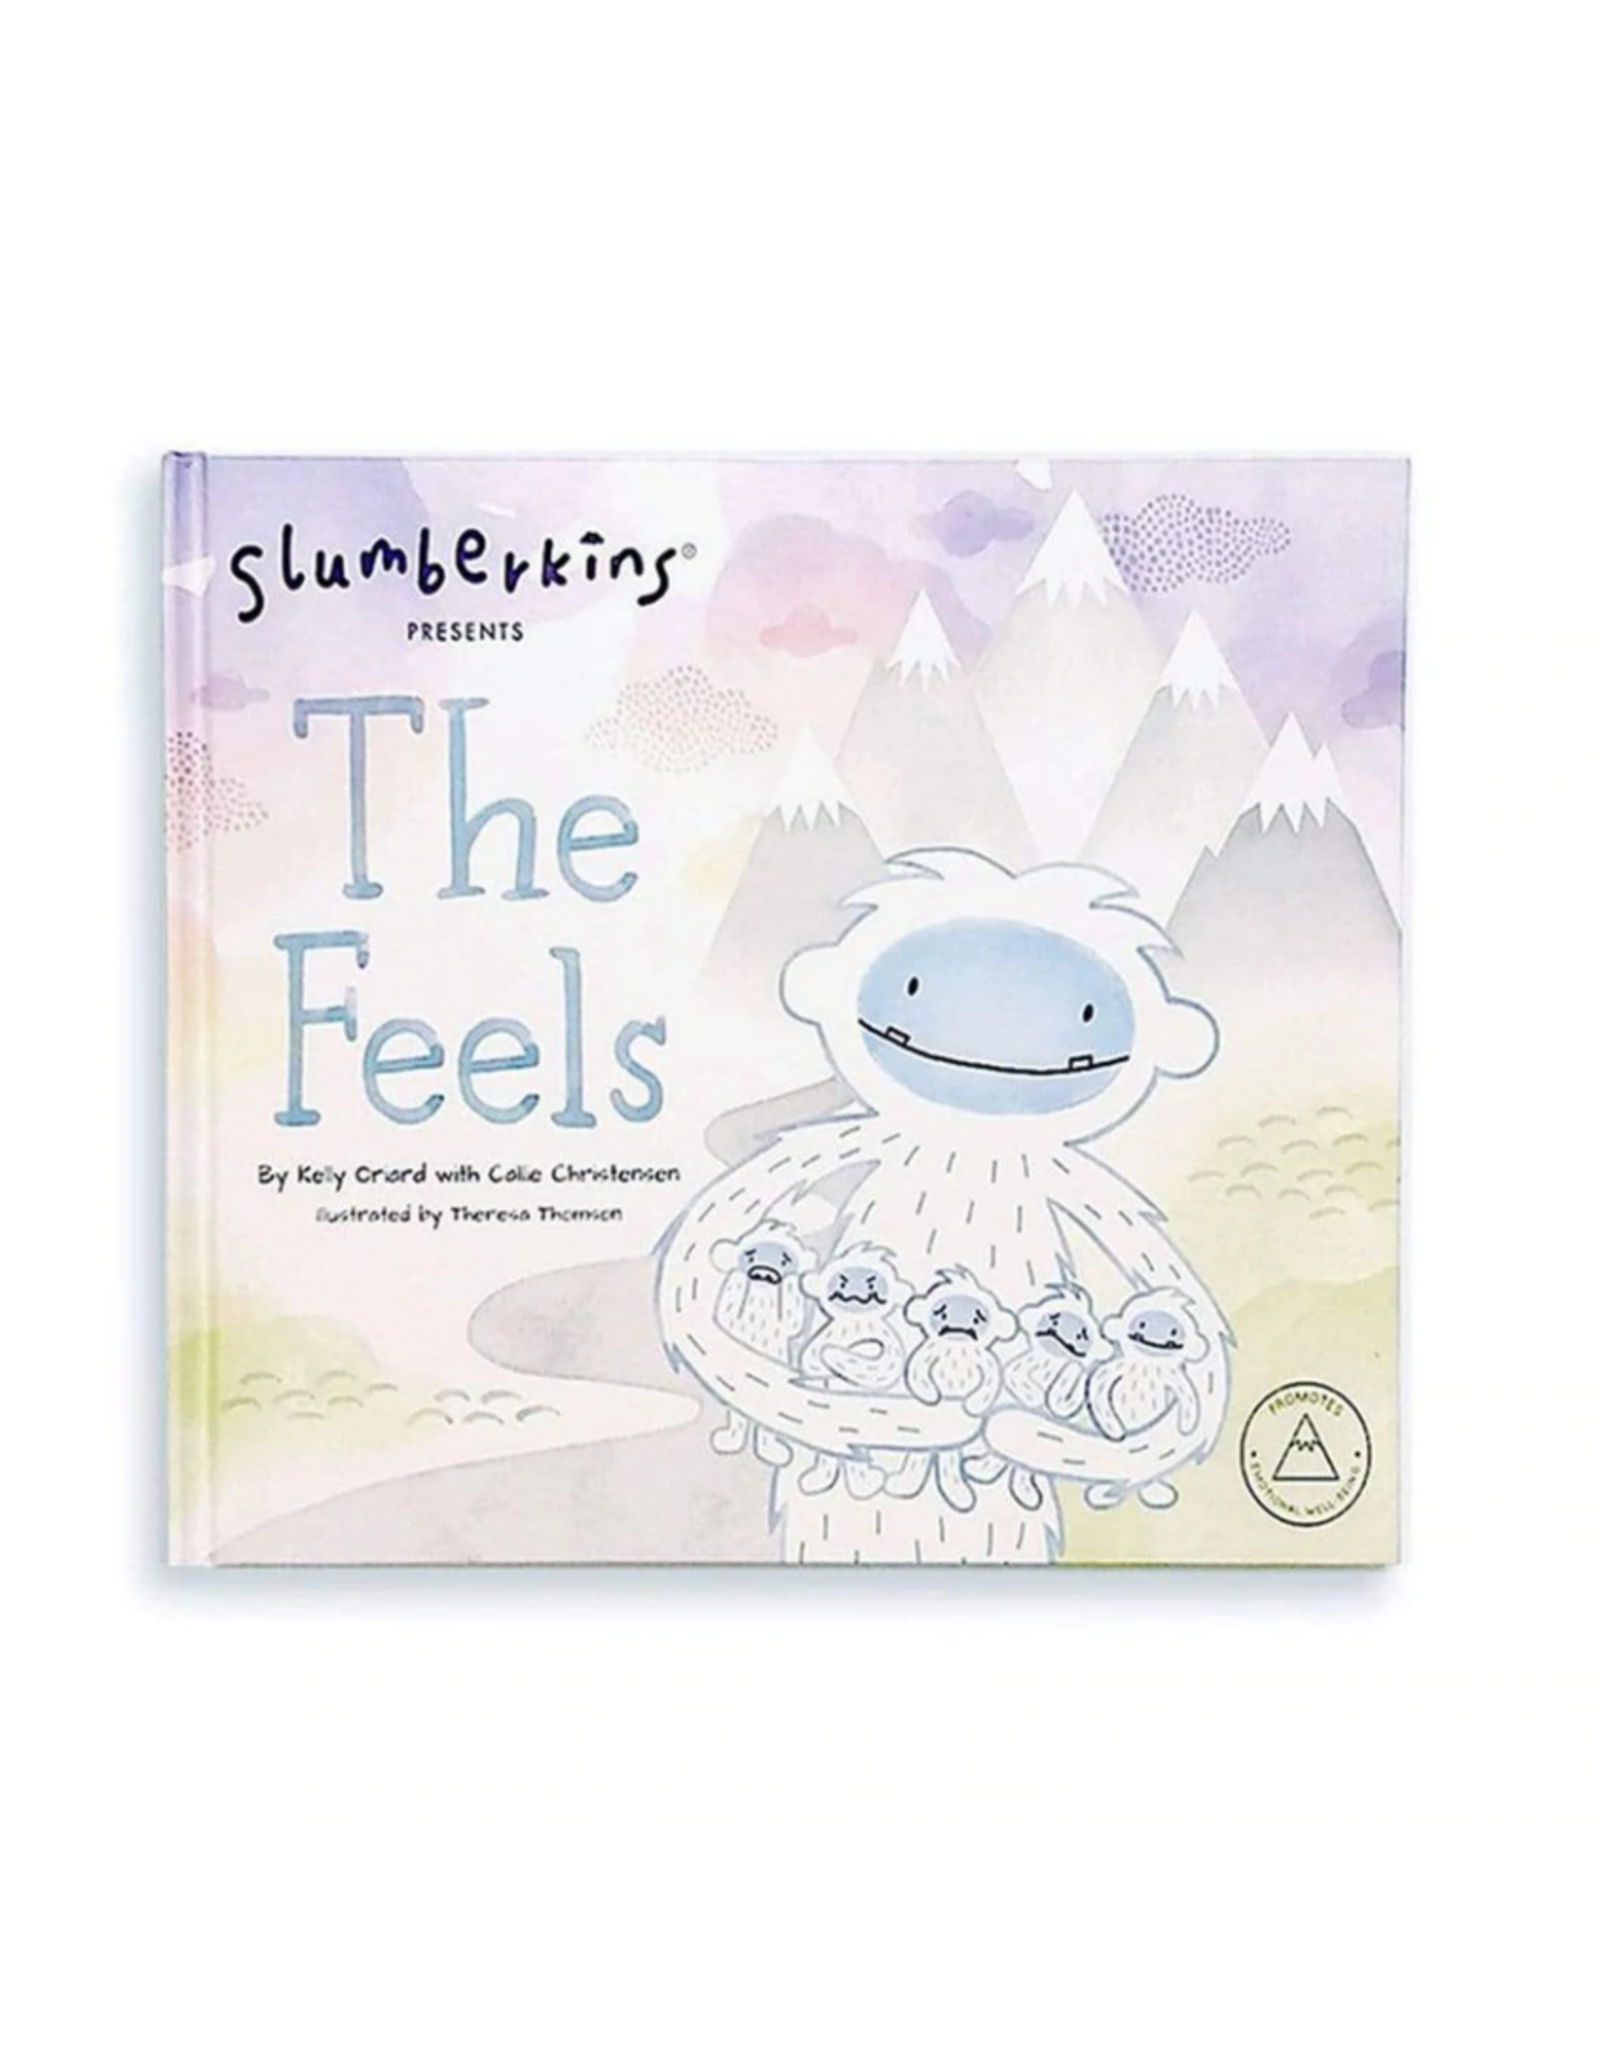 The Feels Book - Emotional Well Being